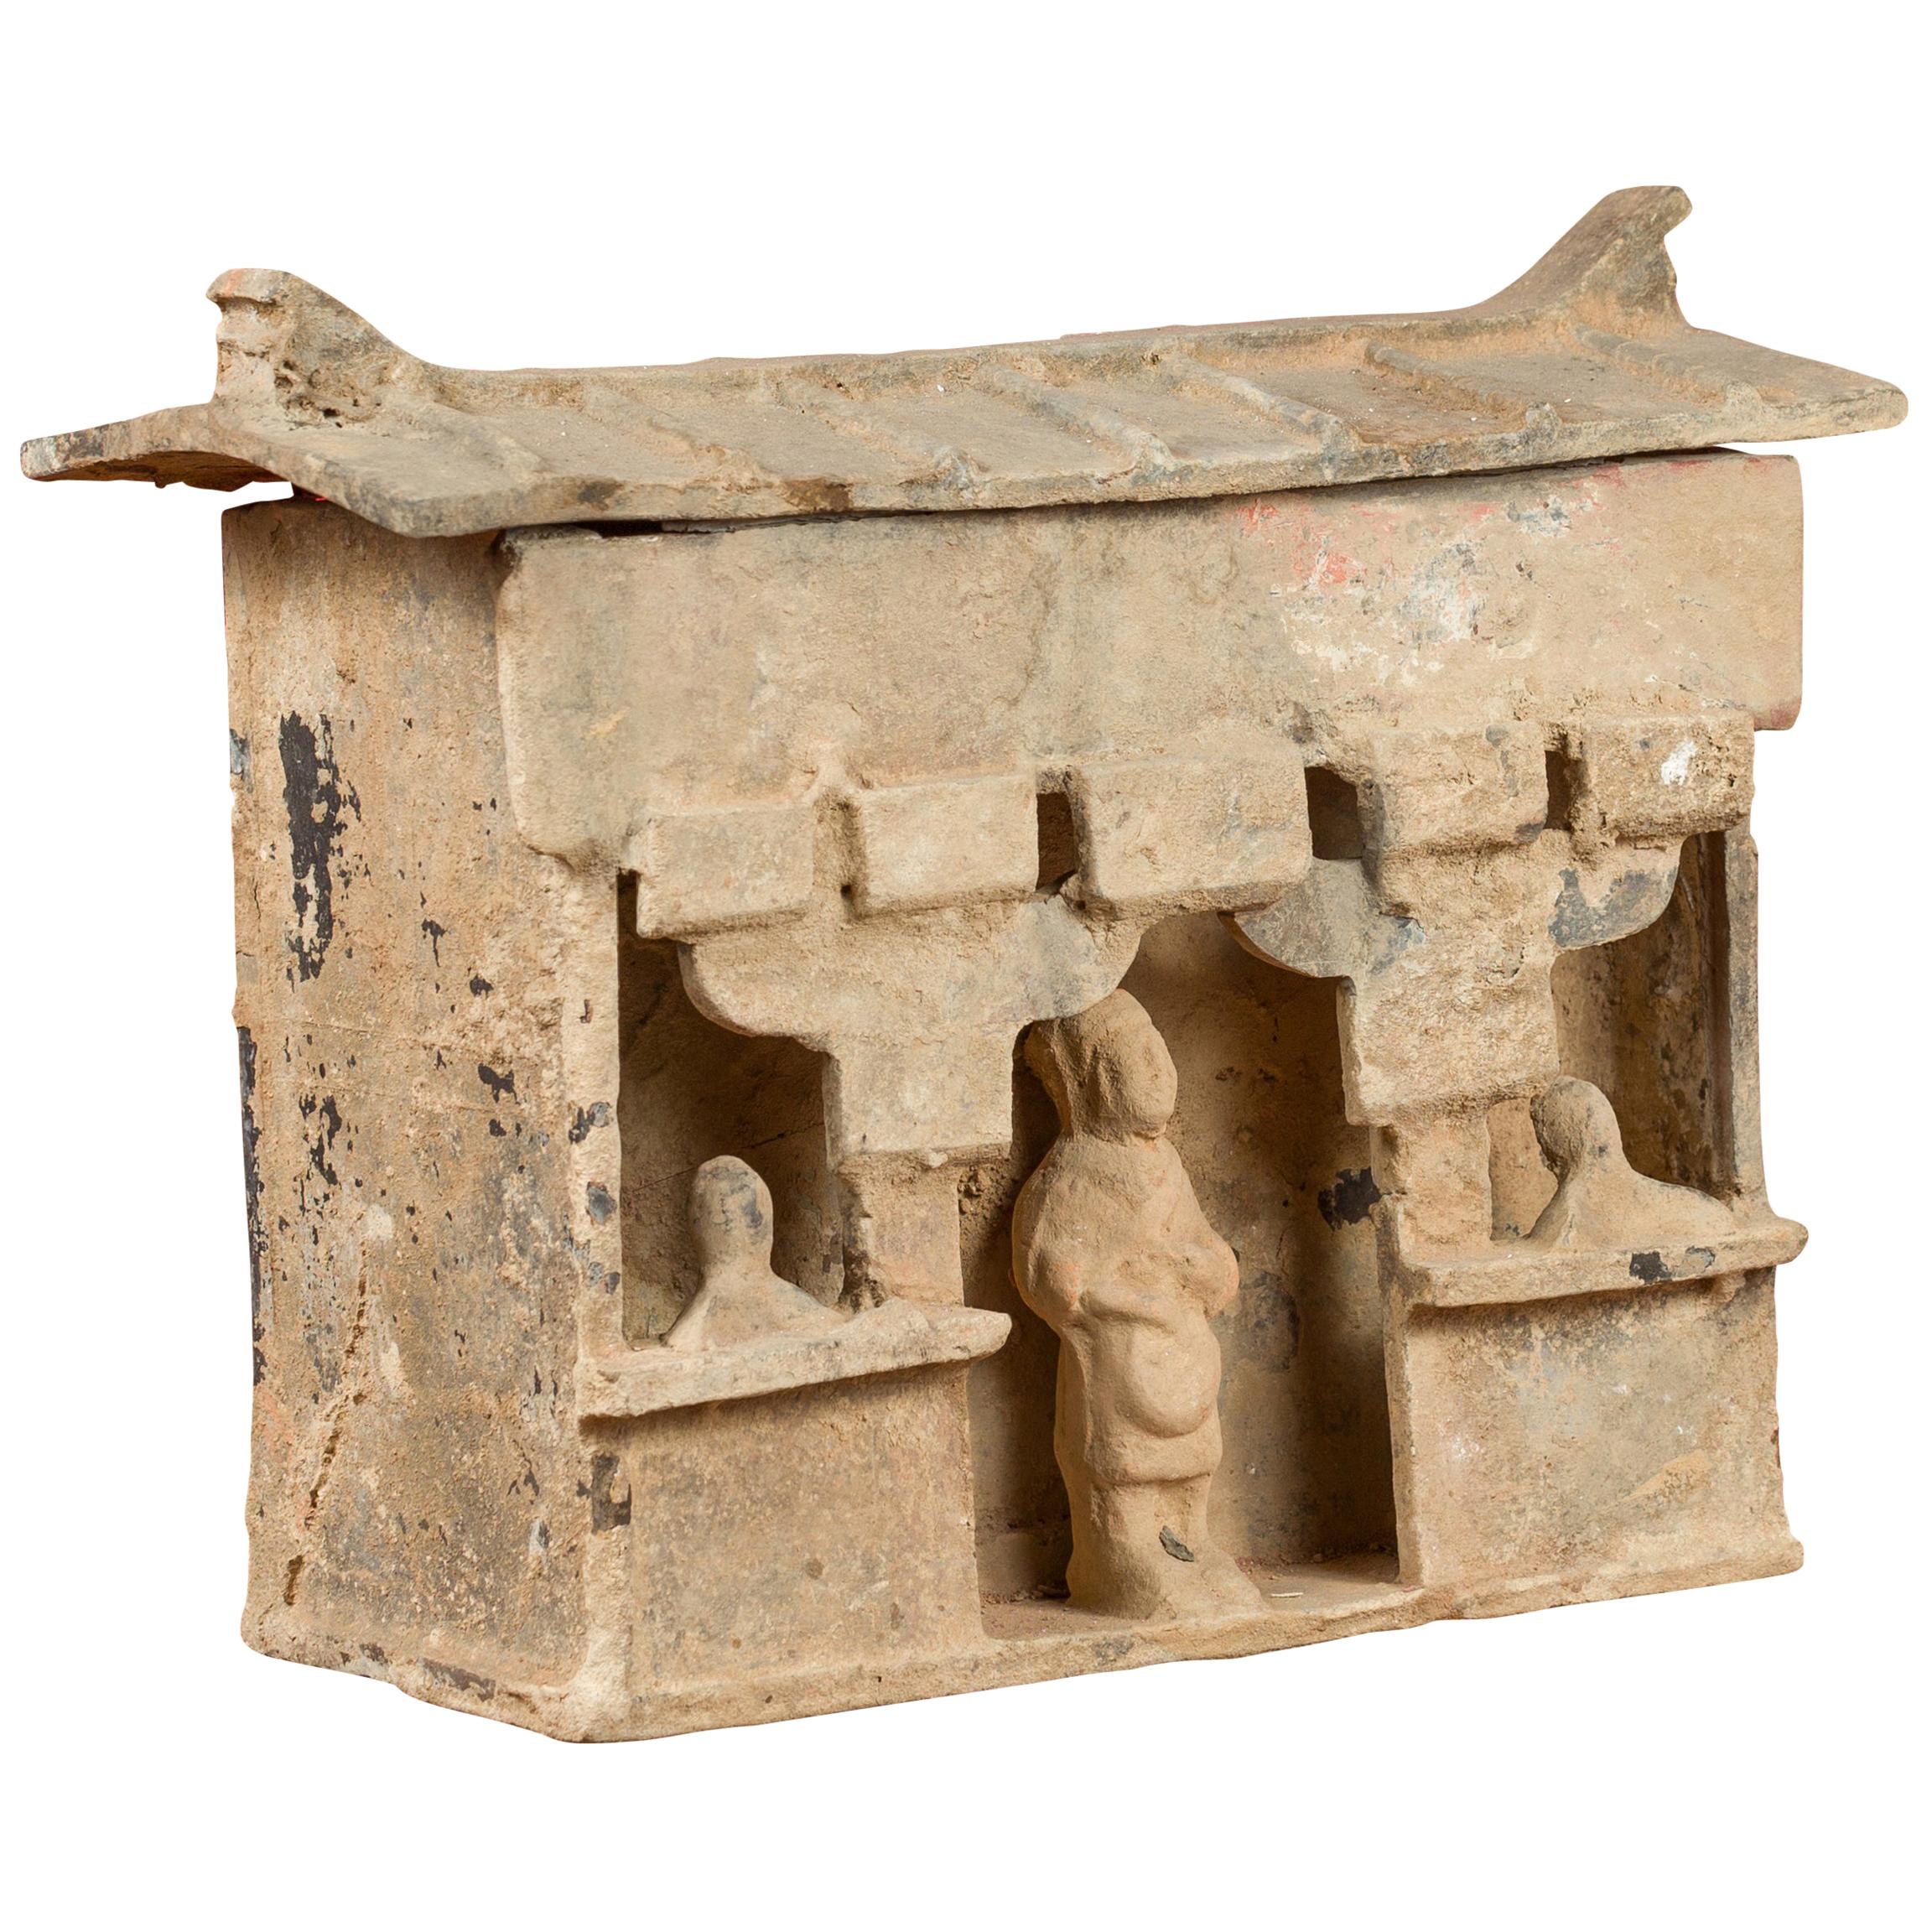 Chinese Han Dynasty Mingqi House Model with Its Inhabitants, circa 202 BC-200 AD